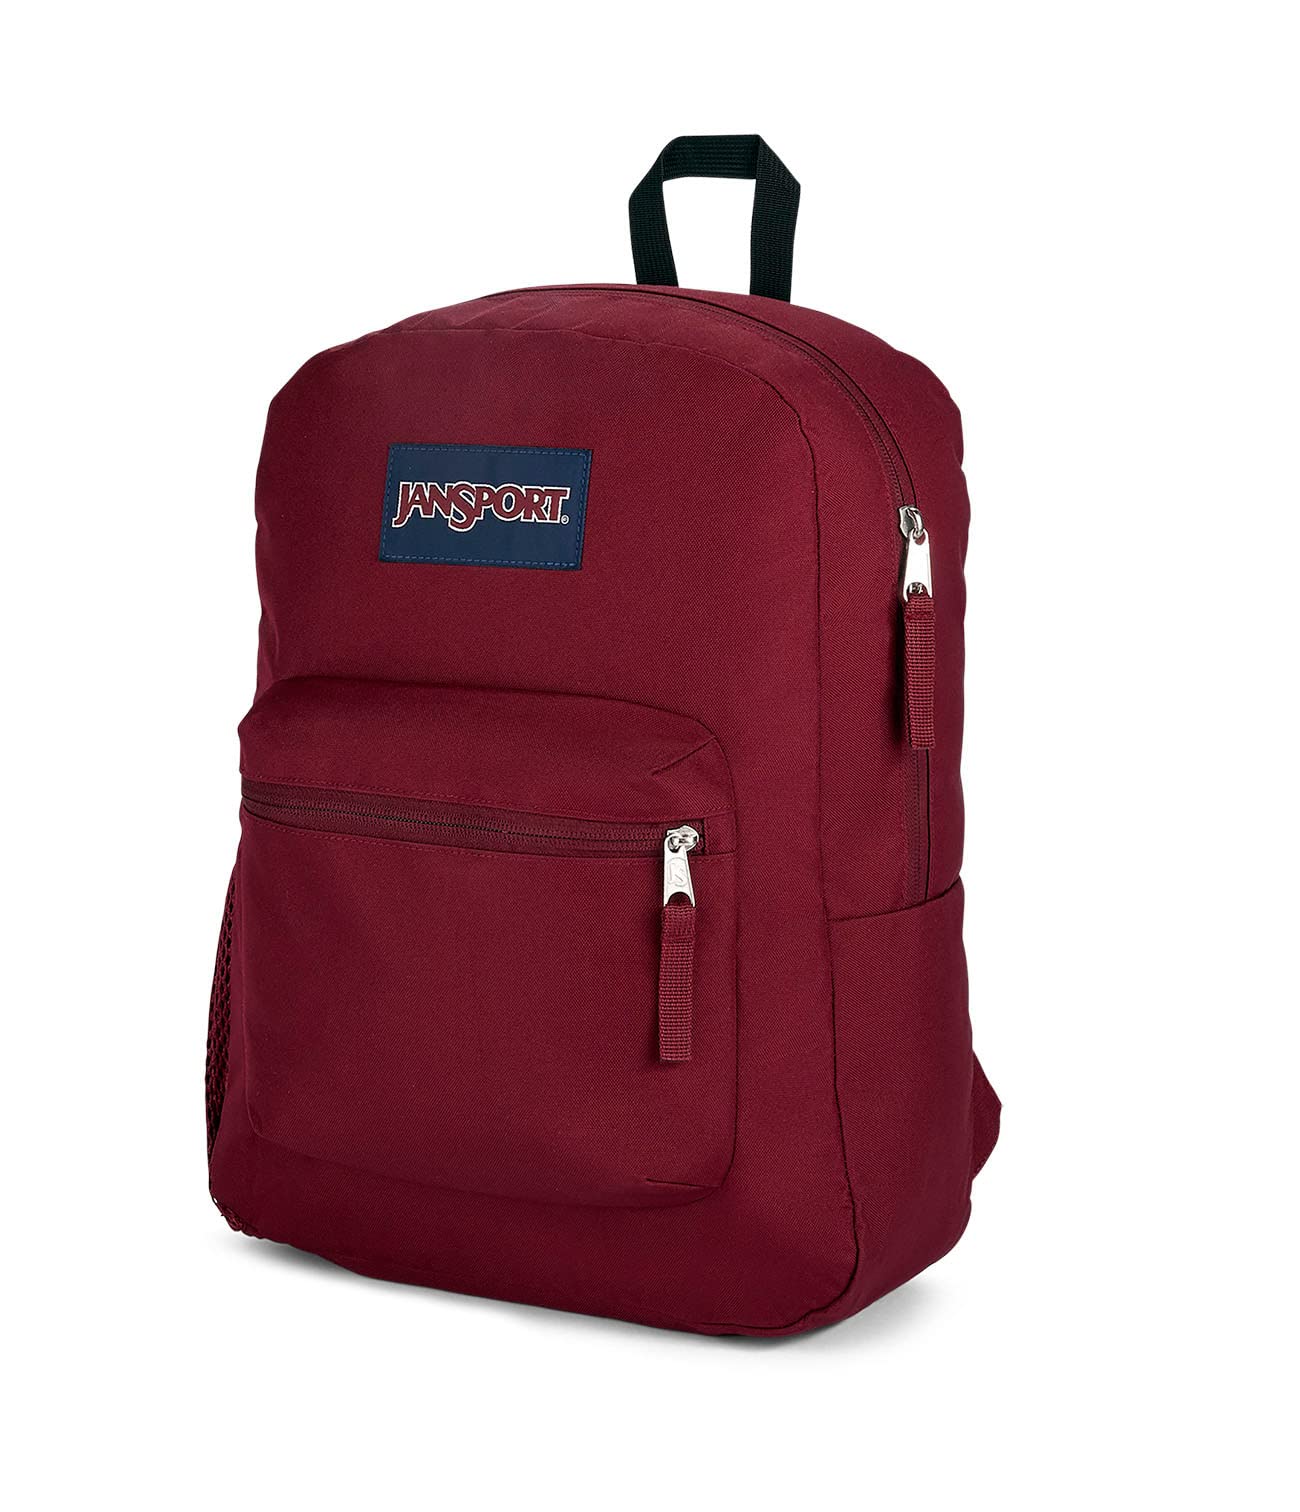 JanSport Cross Town Backpack, Russet Red, One Size